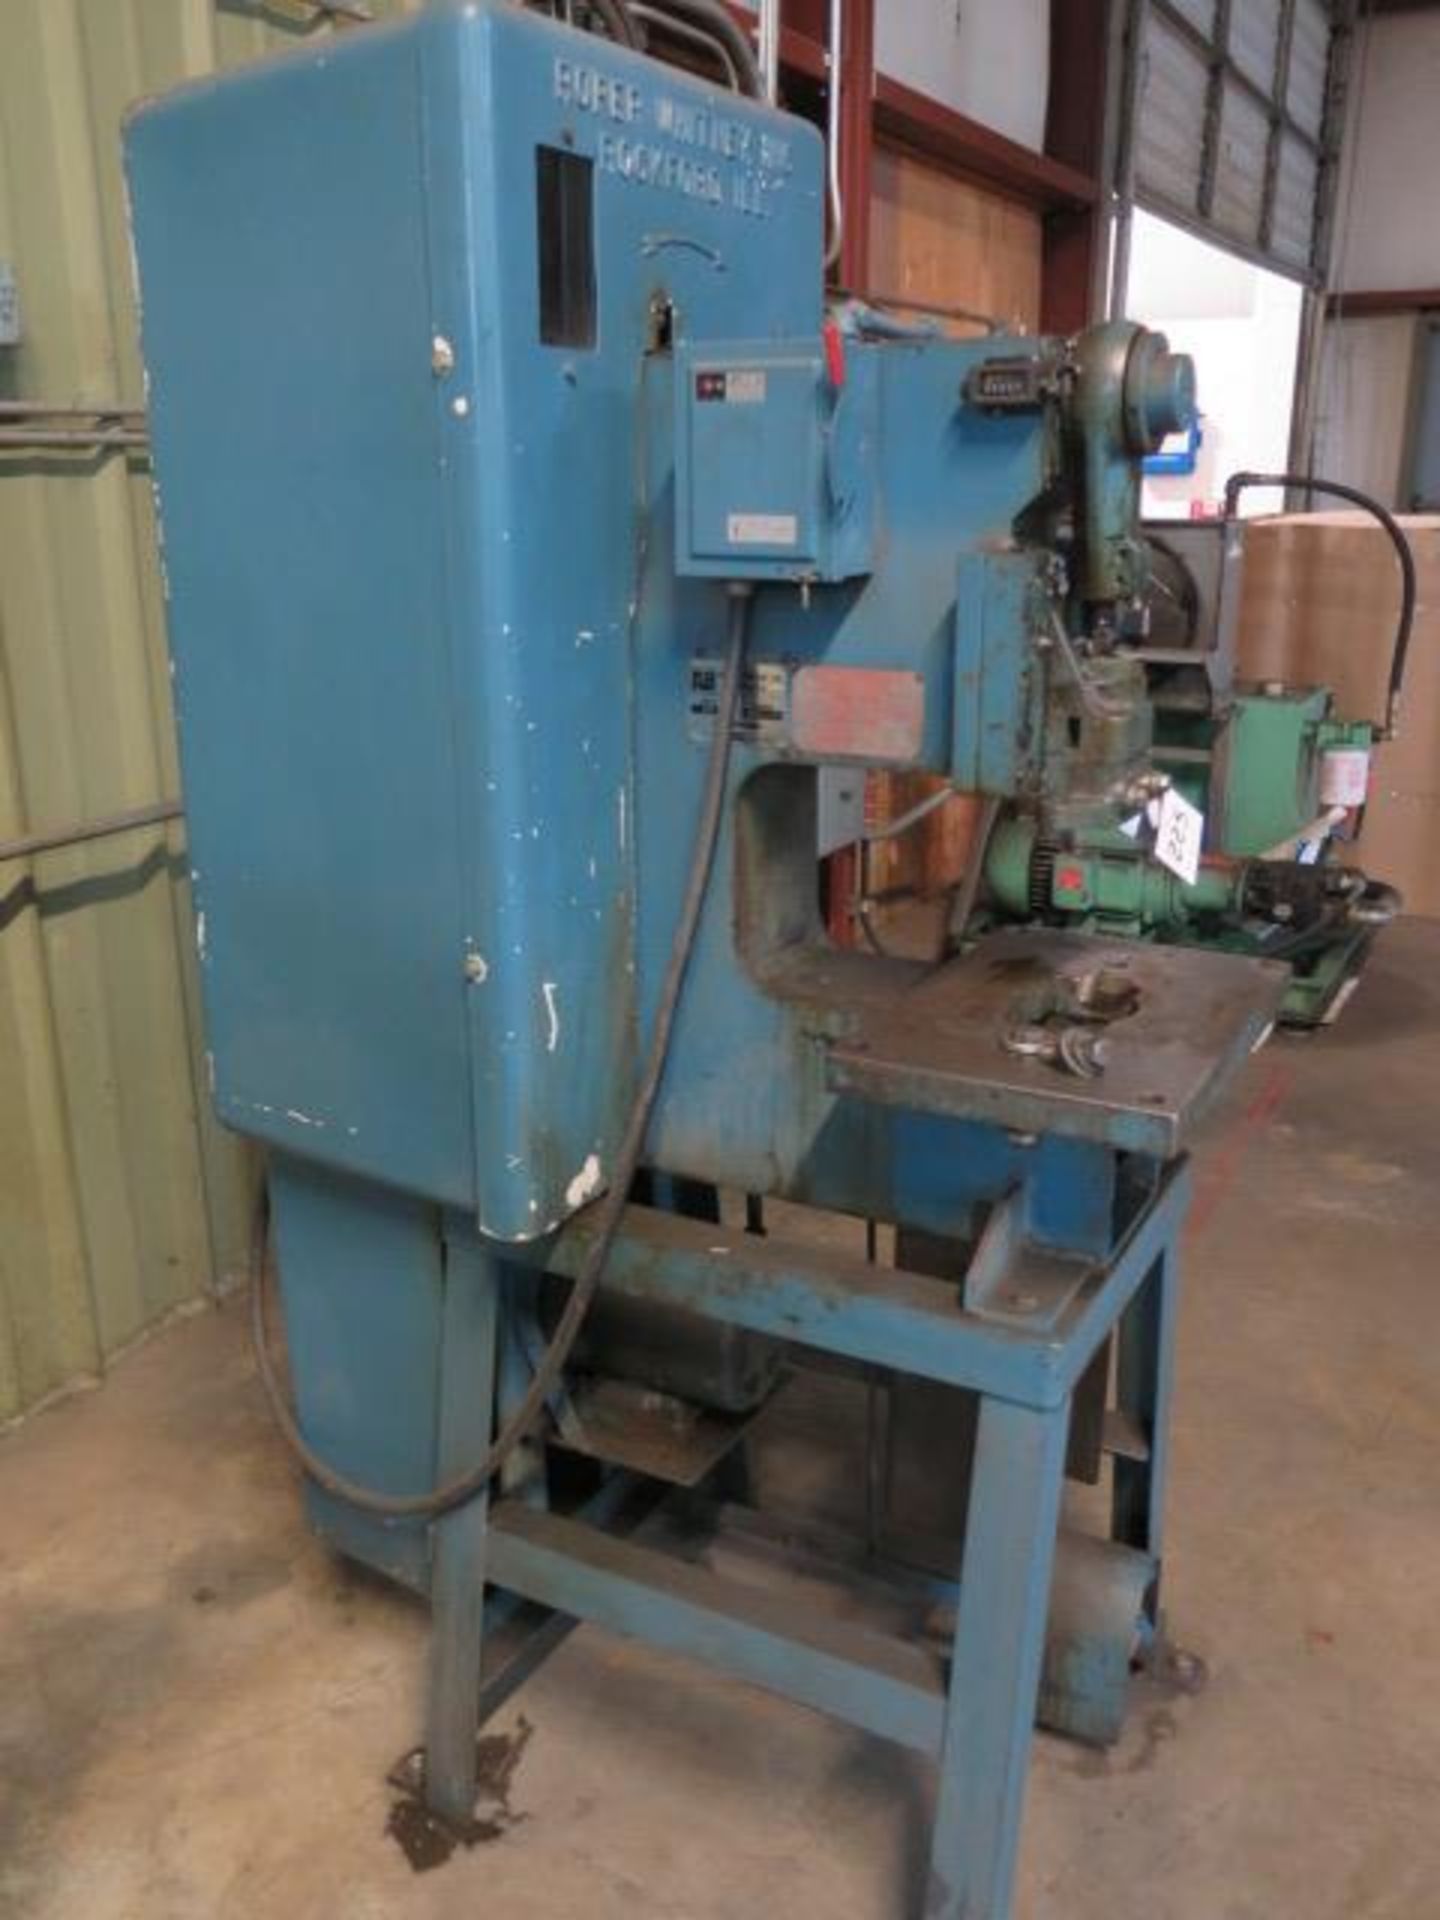 Roper Whitney mdl. 129 10-Ton Stamping Press s/n 1186-4-86 w/ 12" x 18" Bolster Area SOLD AS-IS - Image 3 of 8